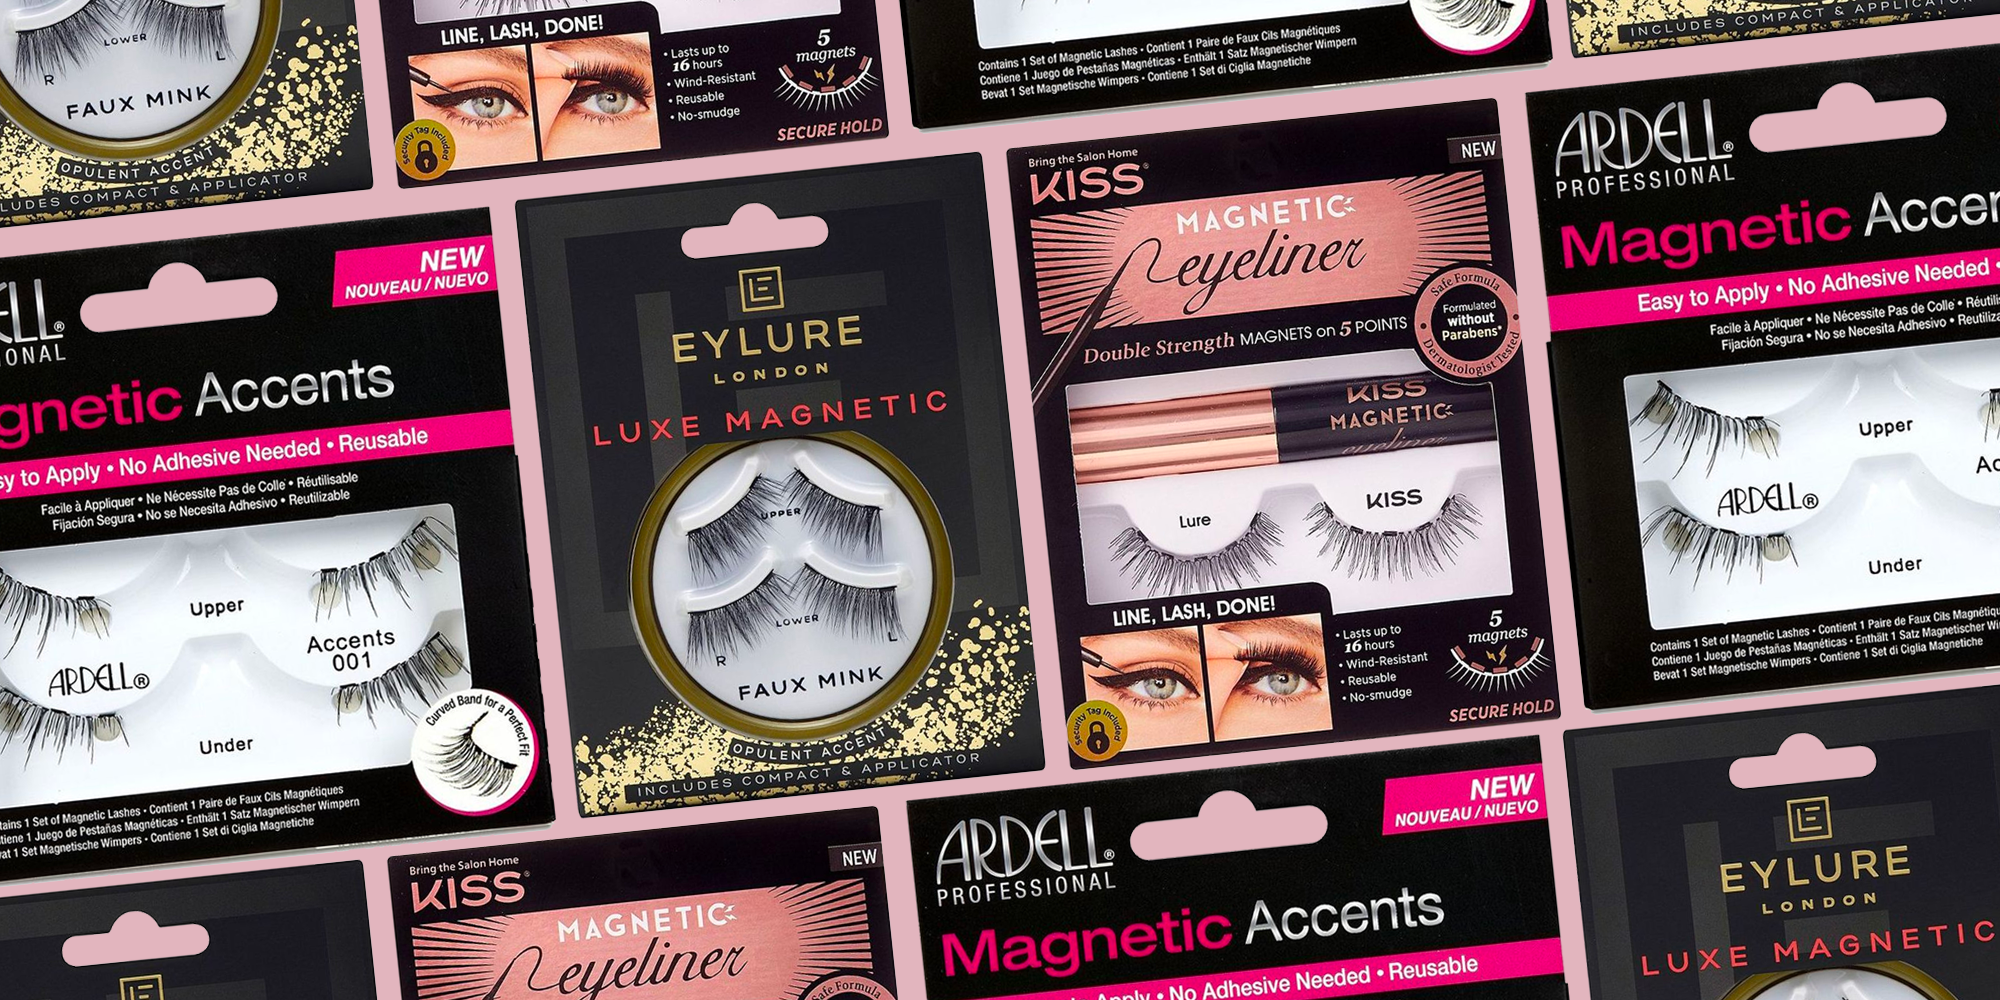 what are the best lashes to buy